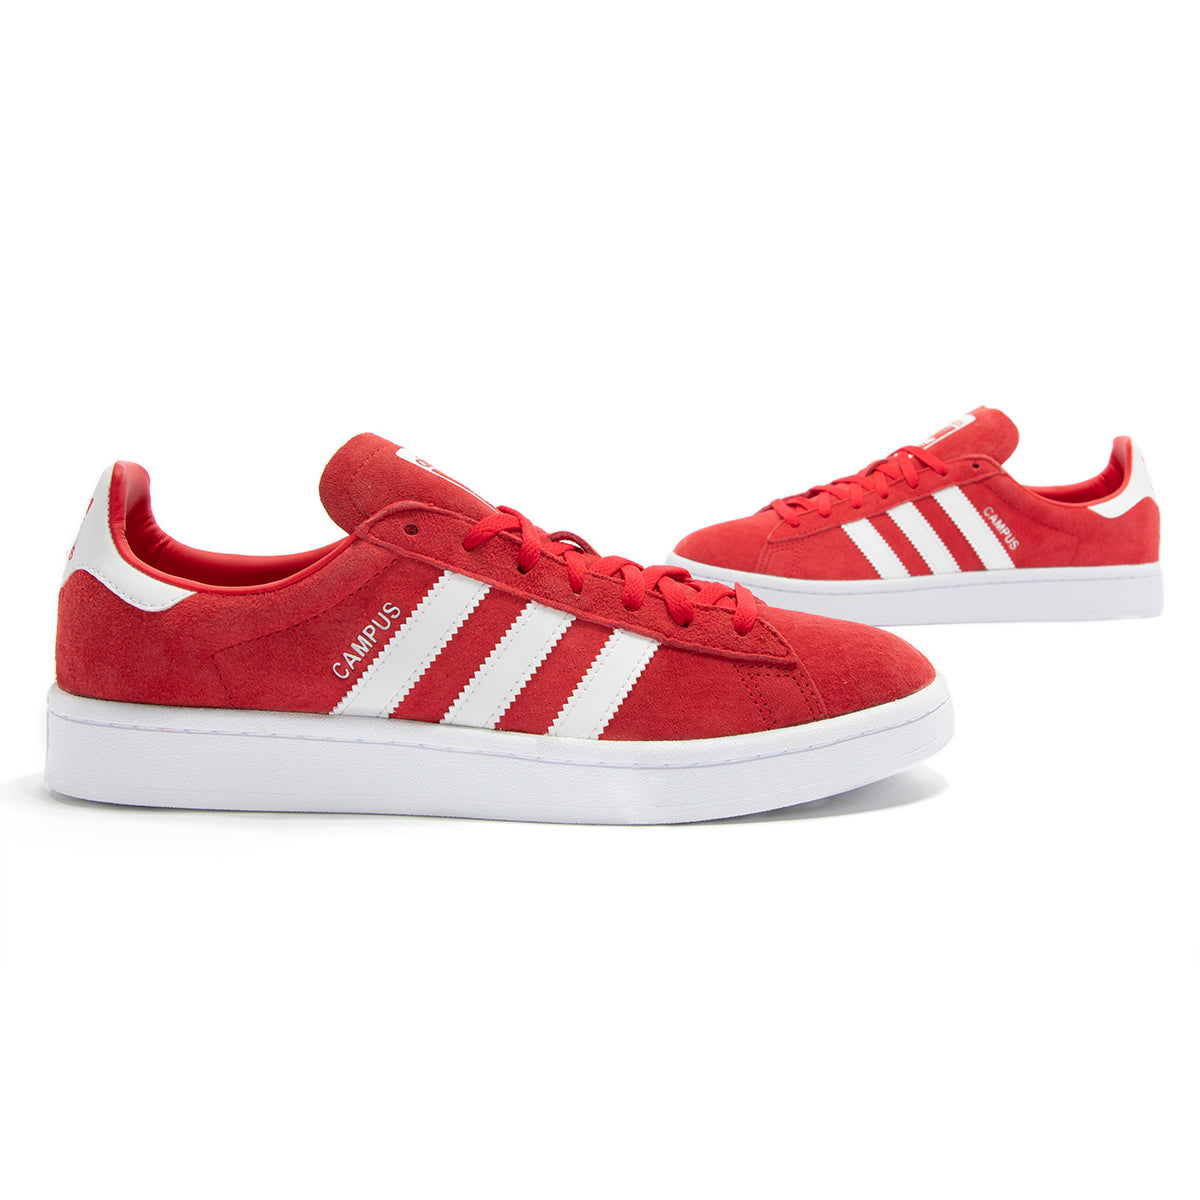 adidas campus red womens